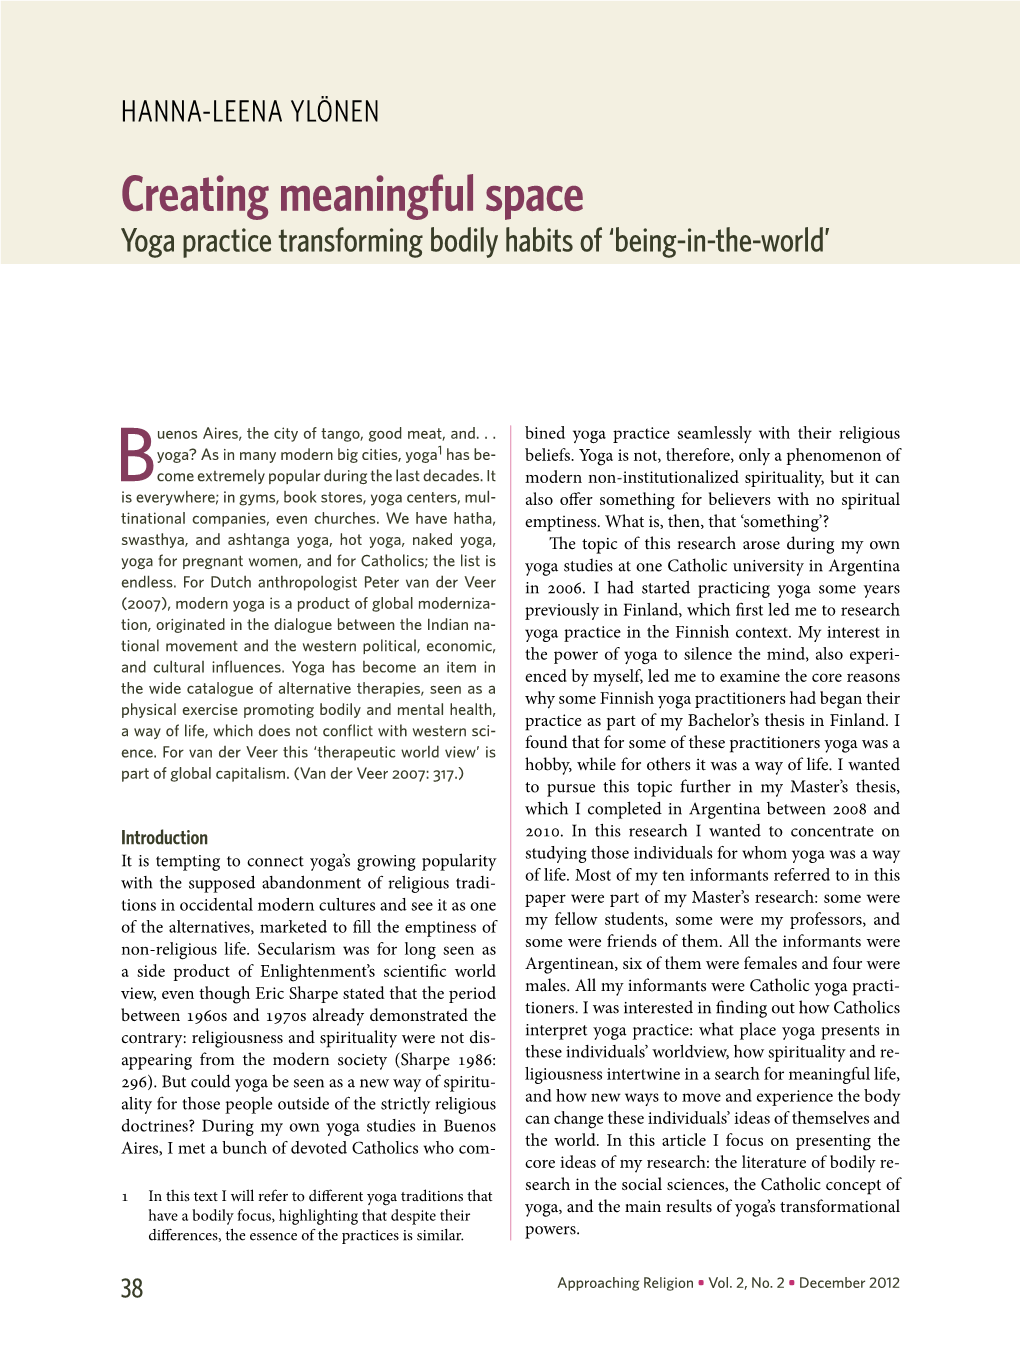 Creating Meaningful Space Yoga Practice Transforming Bodily Habits of ‘Being-In-The-World’